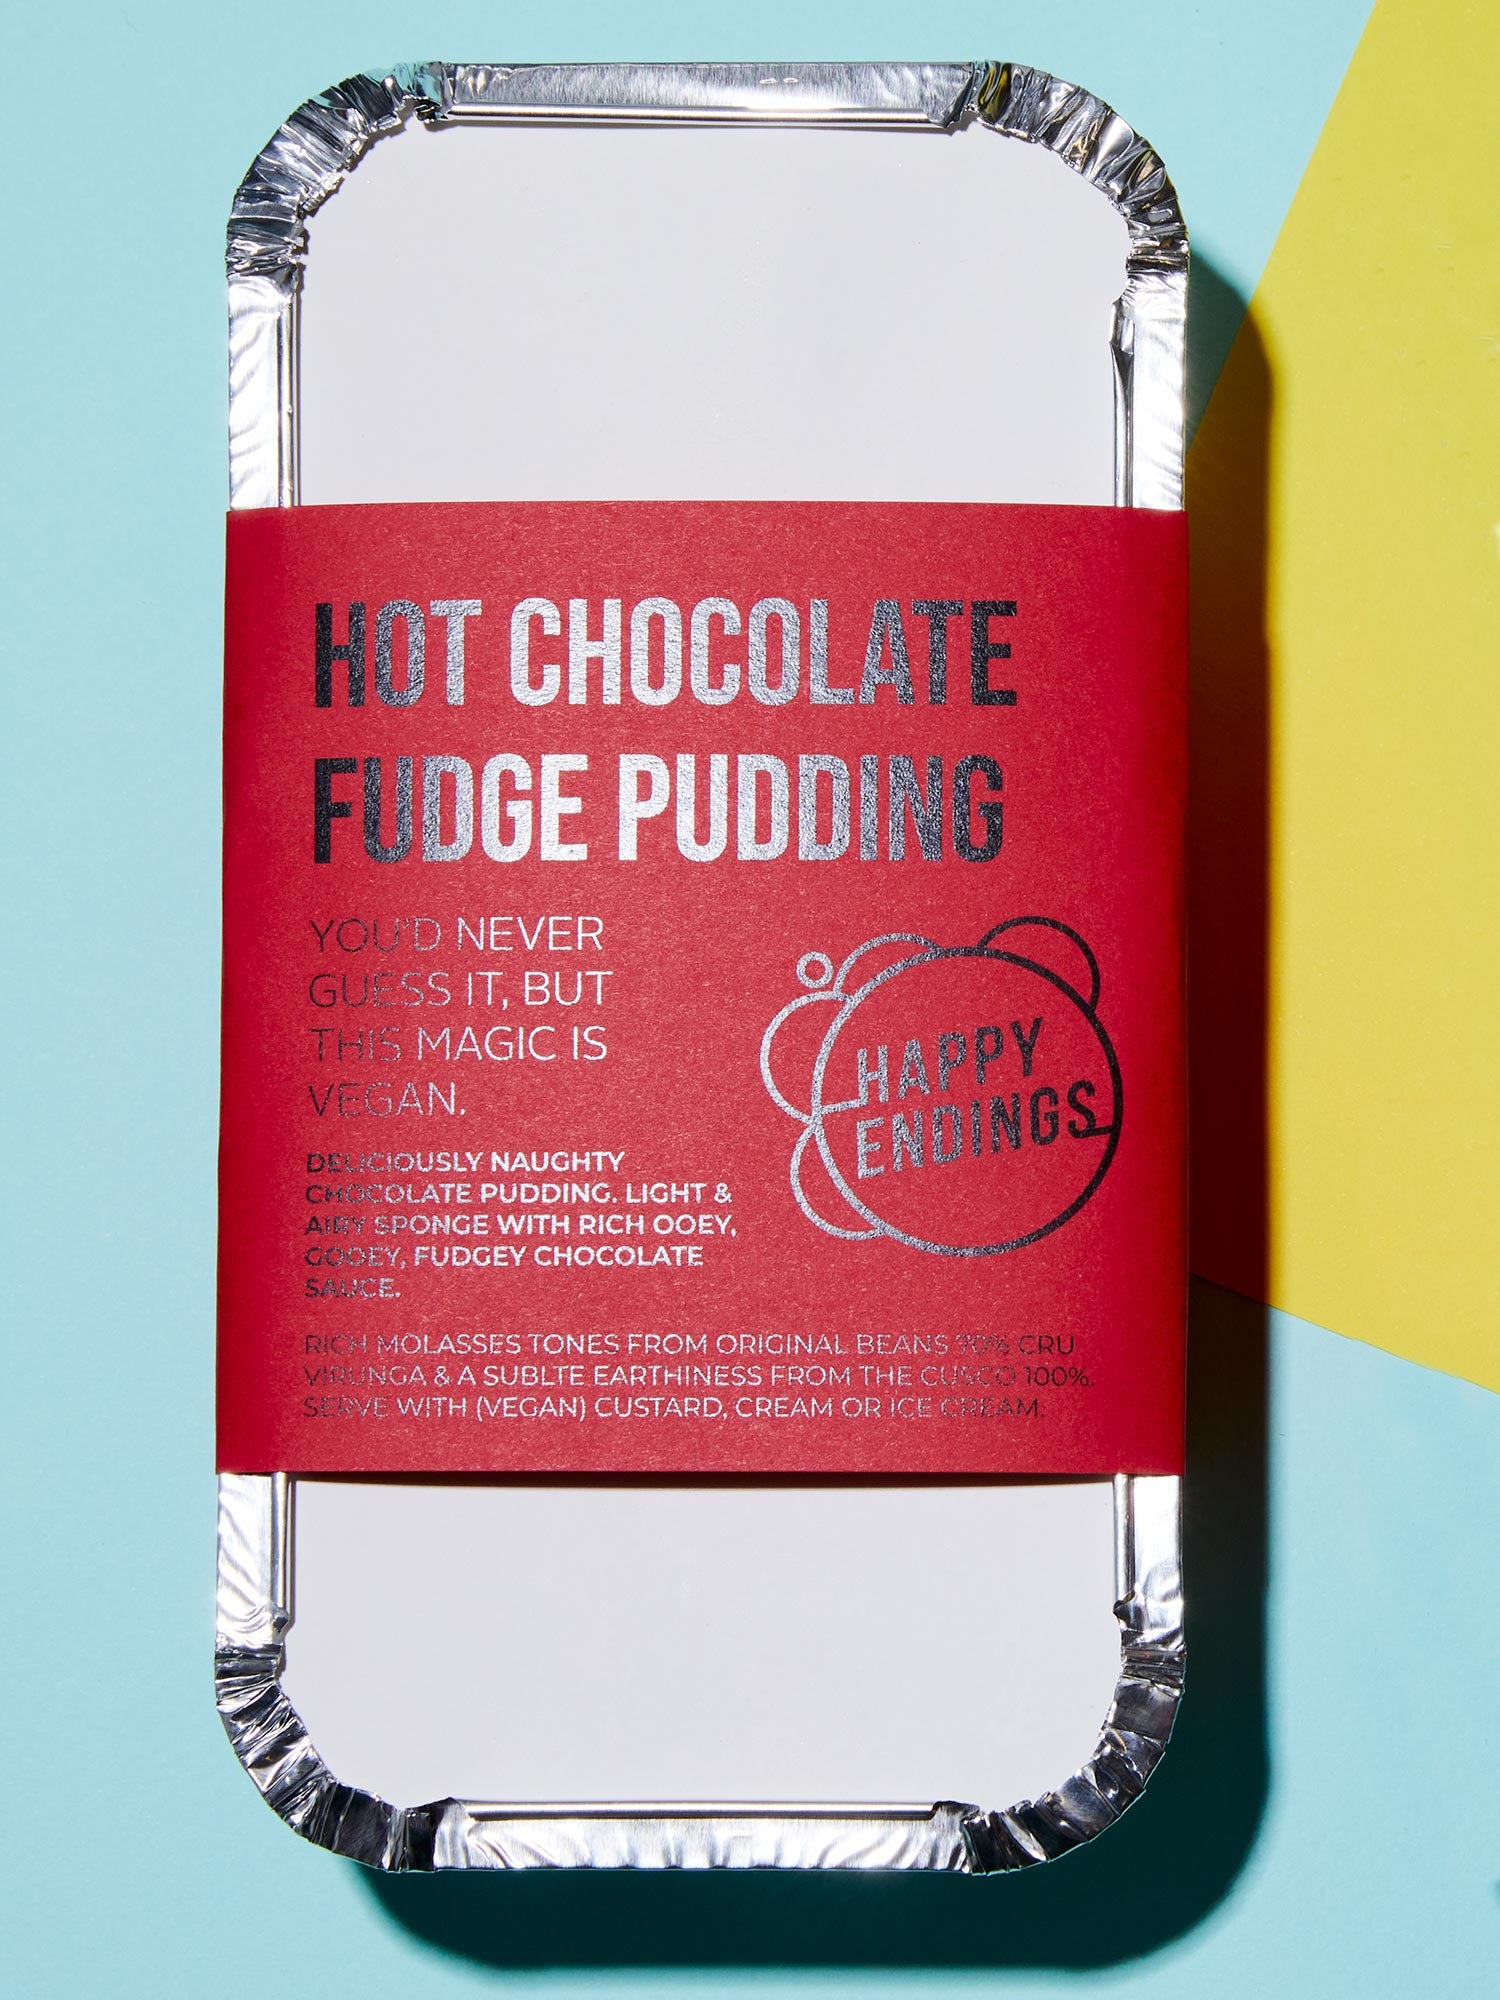 Hot Chocolate Fudge Pudding by Happy Endings